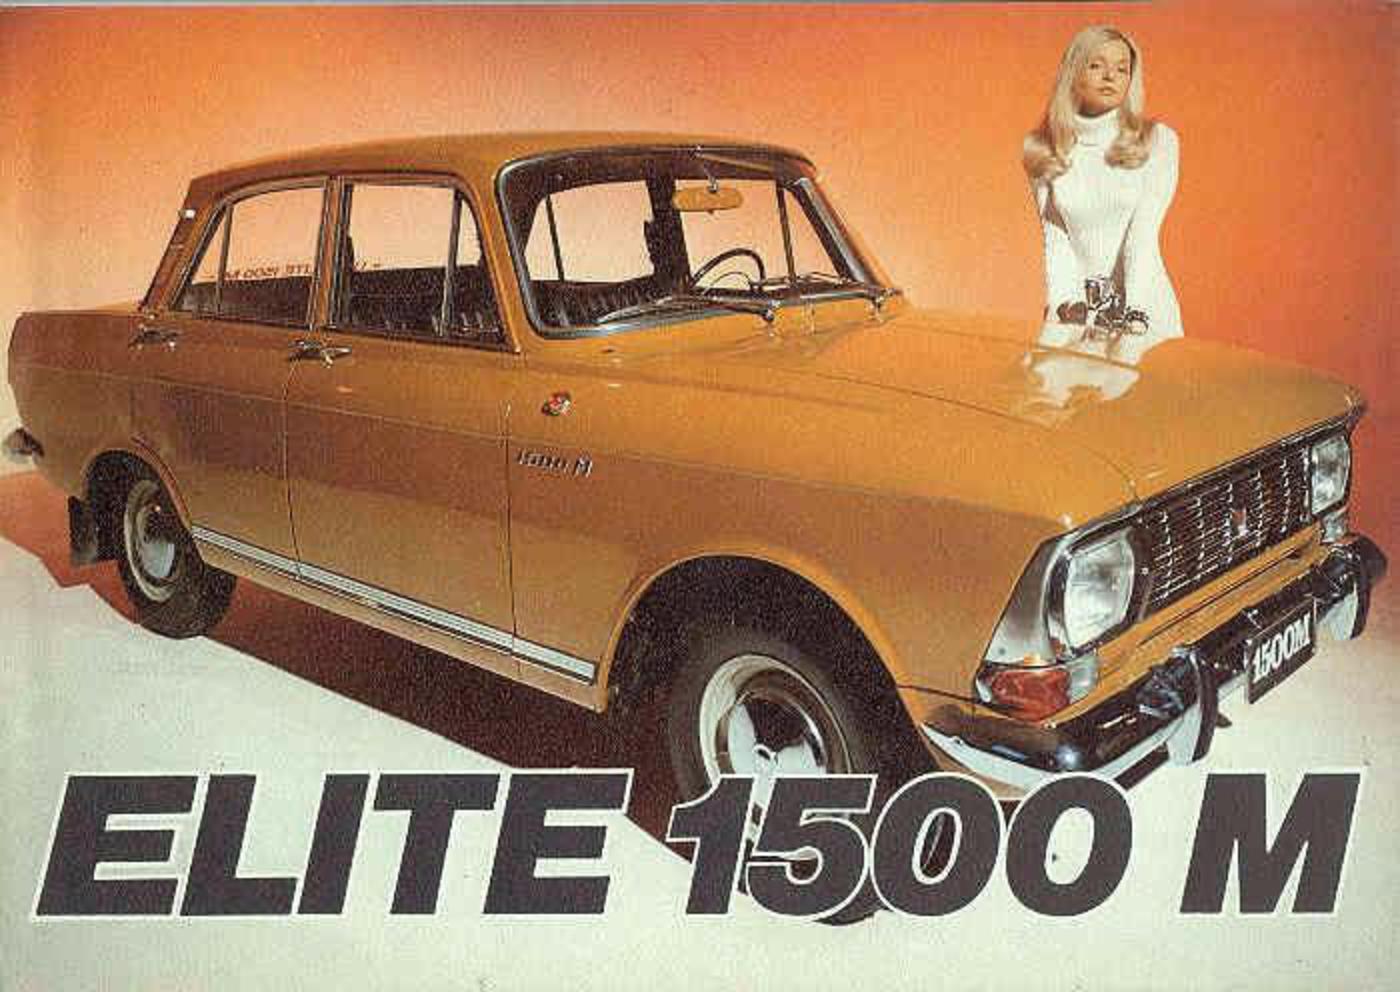 Gallery of all models of Moskvitch: Moskvitch 1500, Moskvitch 1500 ...